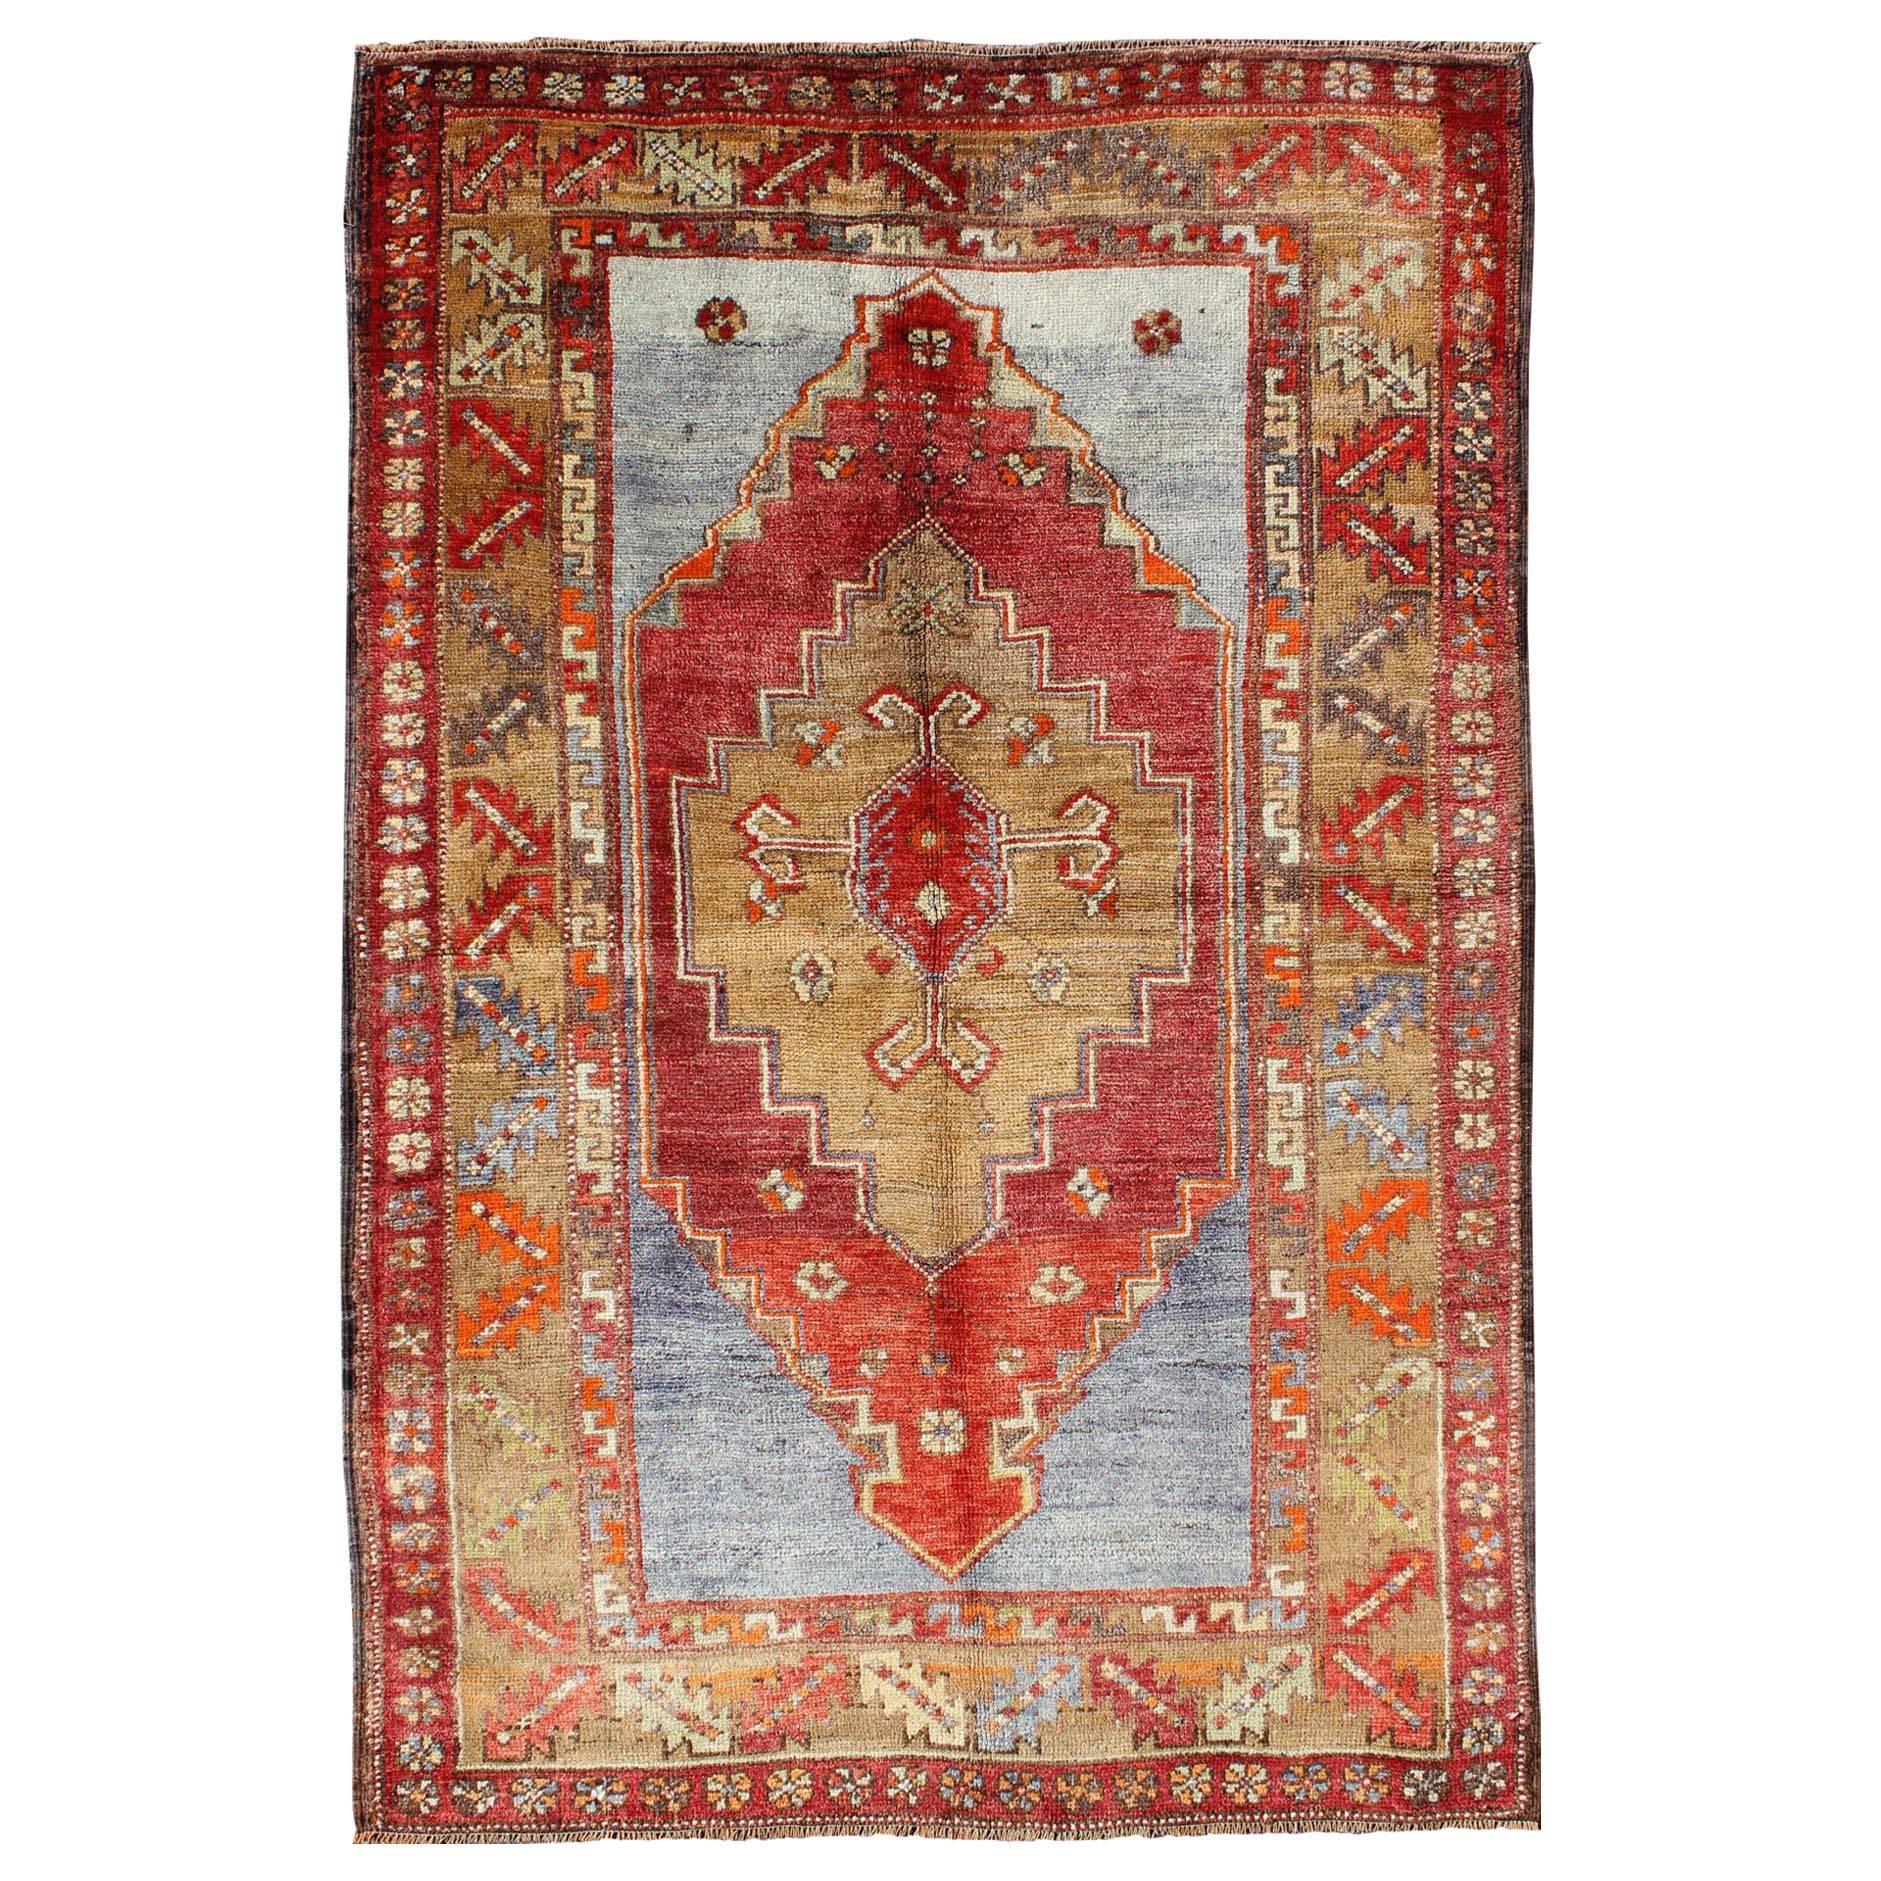 Multicolored Vintage Turkish Oushak Rug in Red, Blue and Soft Orange Colors